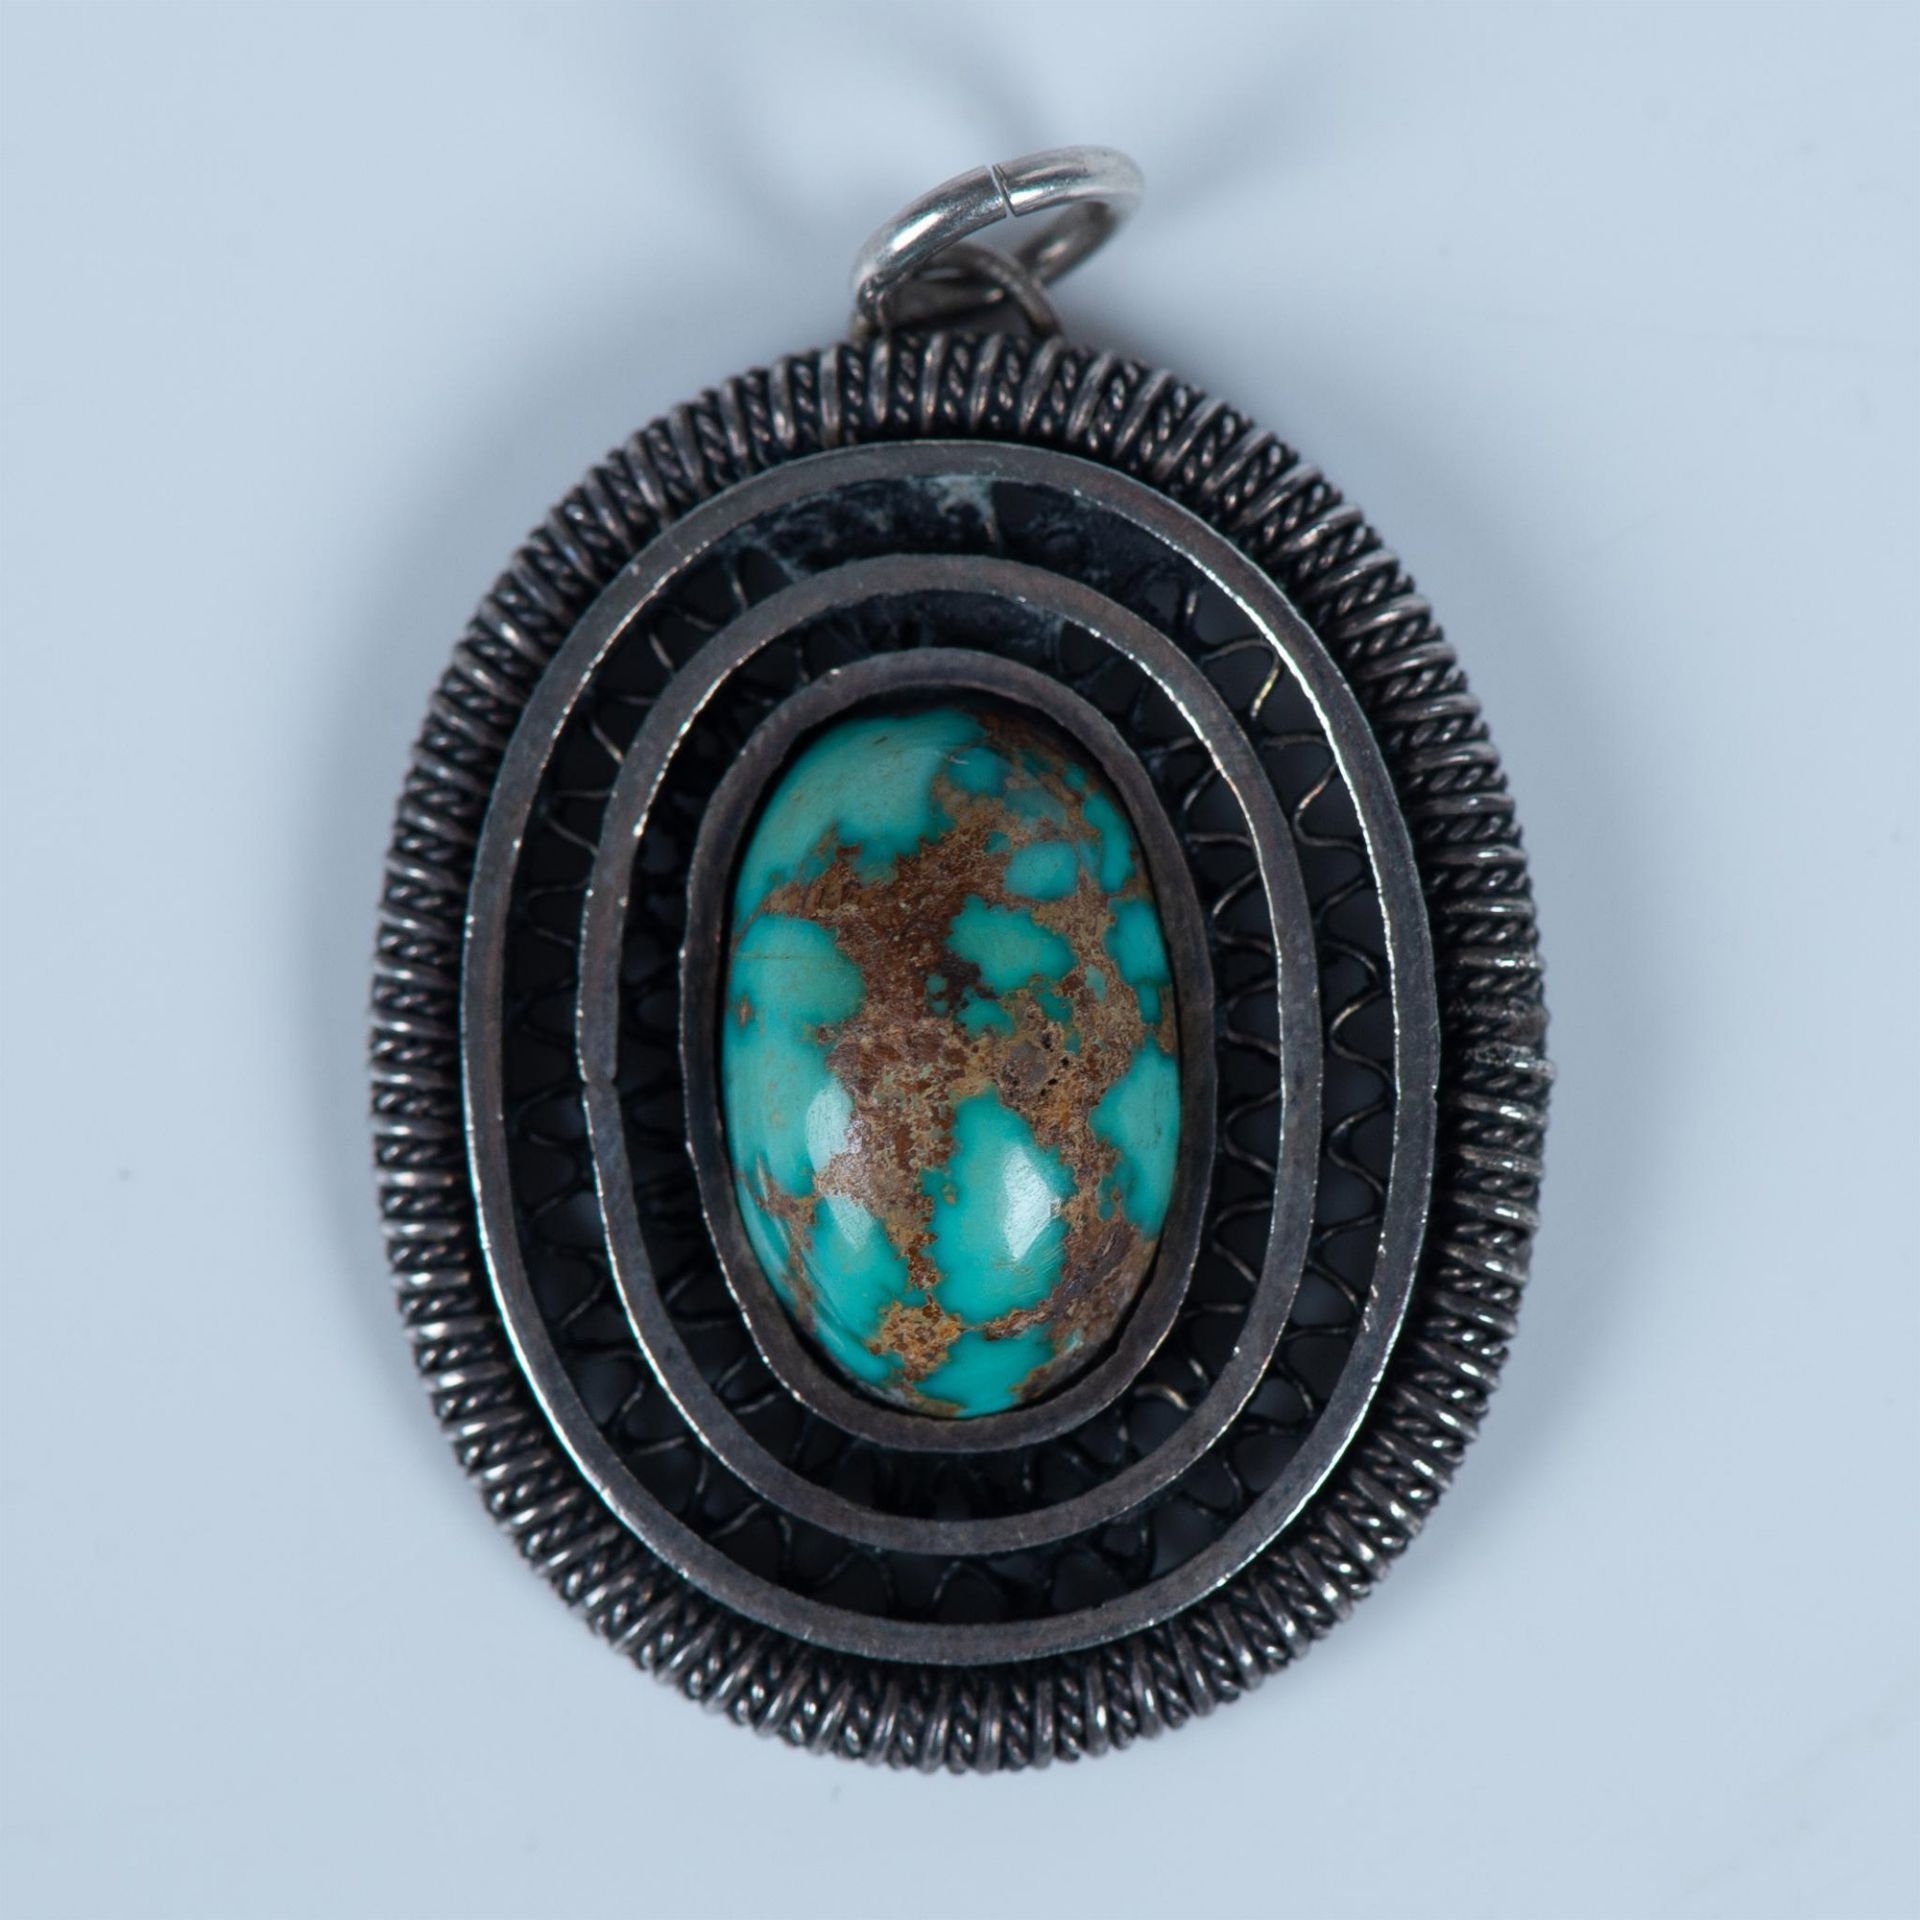 Vintage Handmade Sterling Silver and Turquoise Pendant